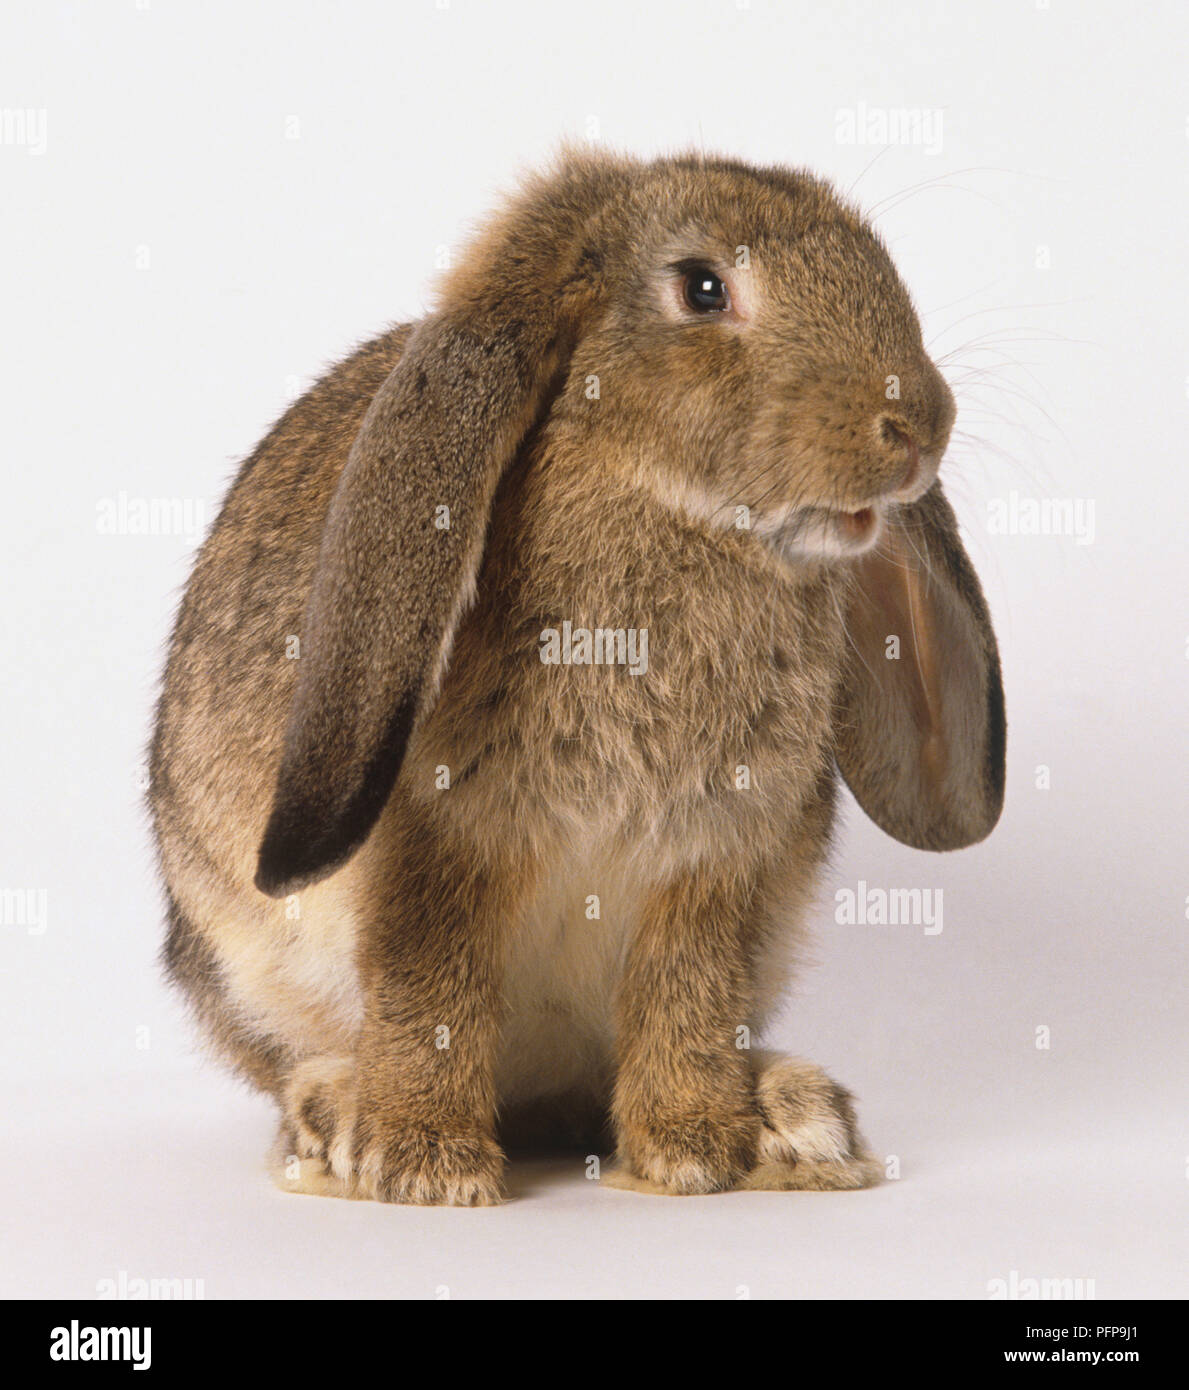 A brown lop-eared Rabbit (Leporidae), profile view Stock Photo - Alamy